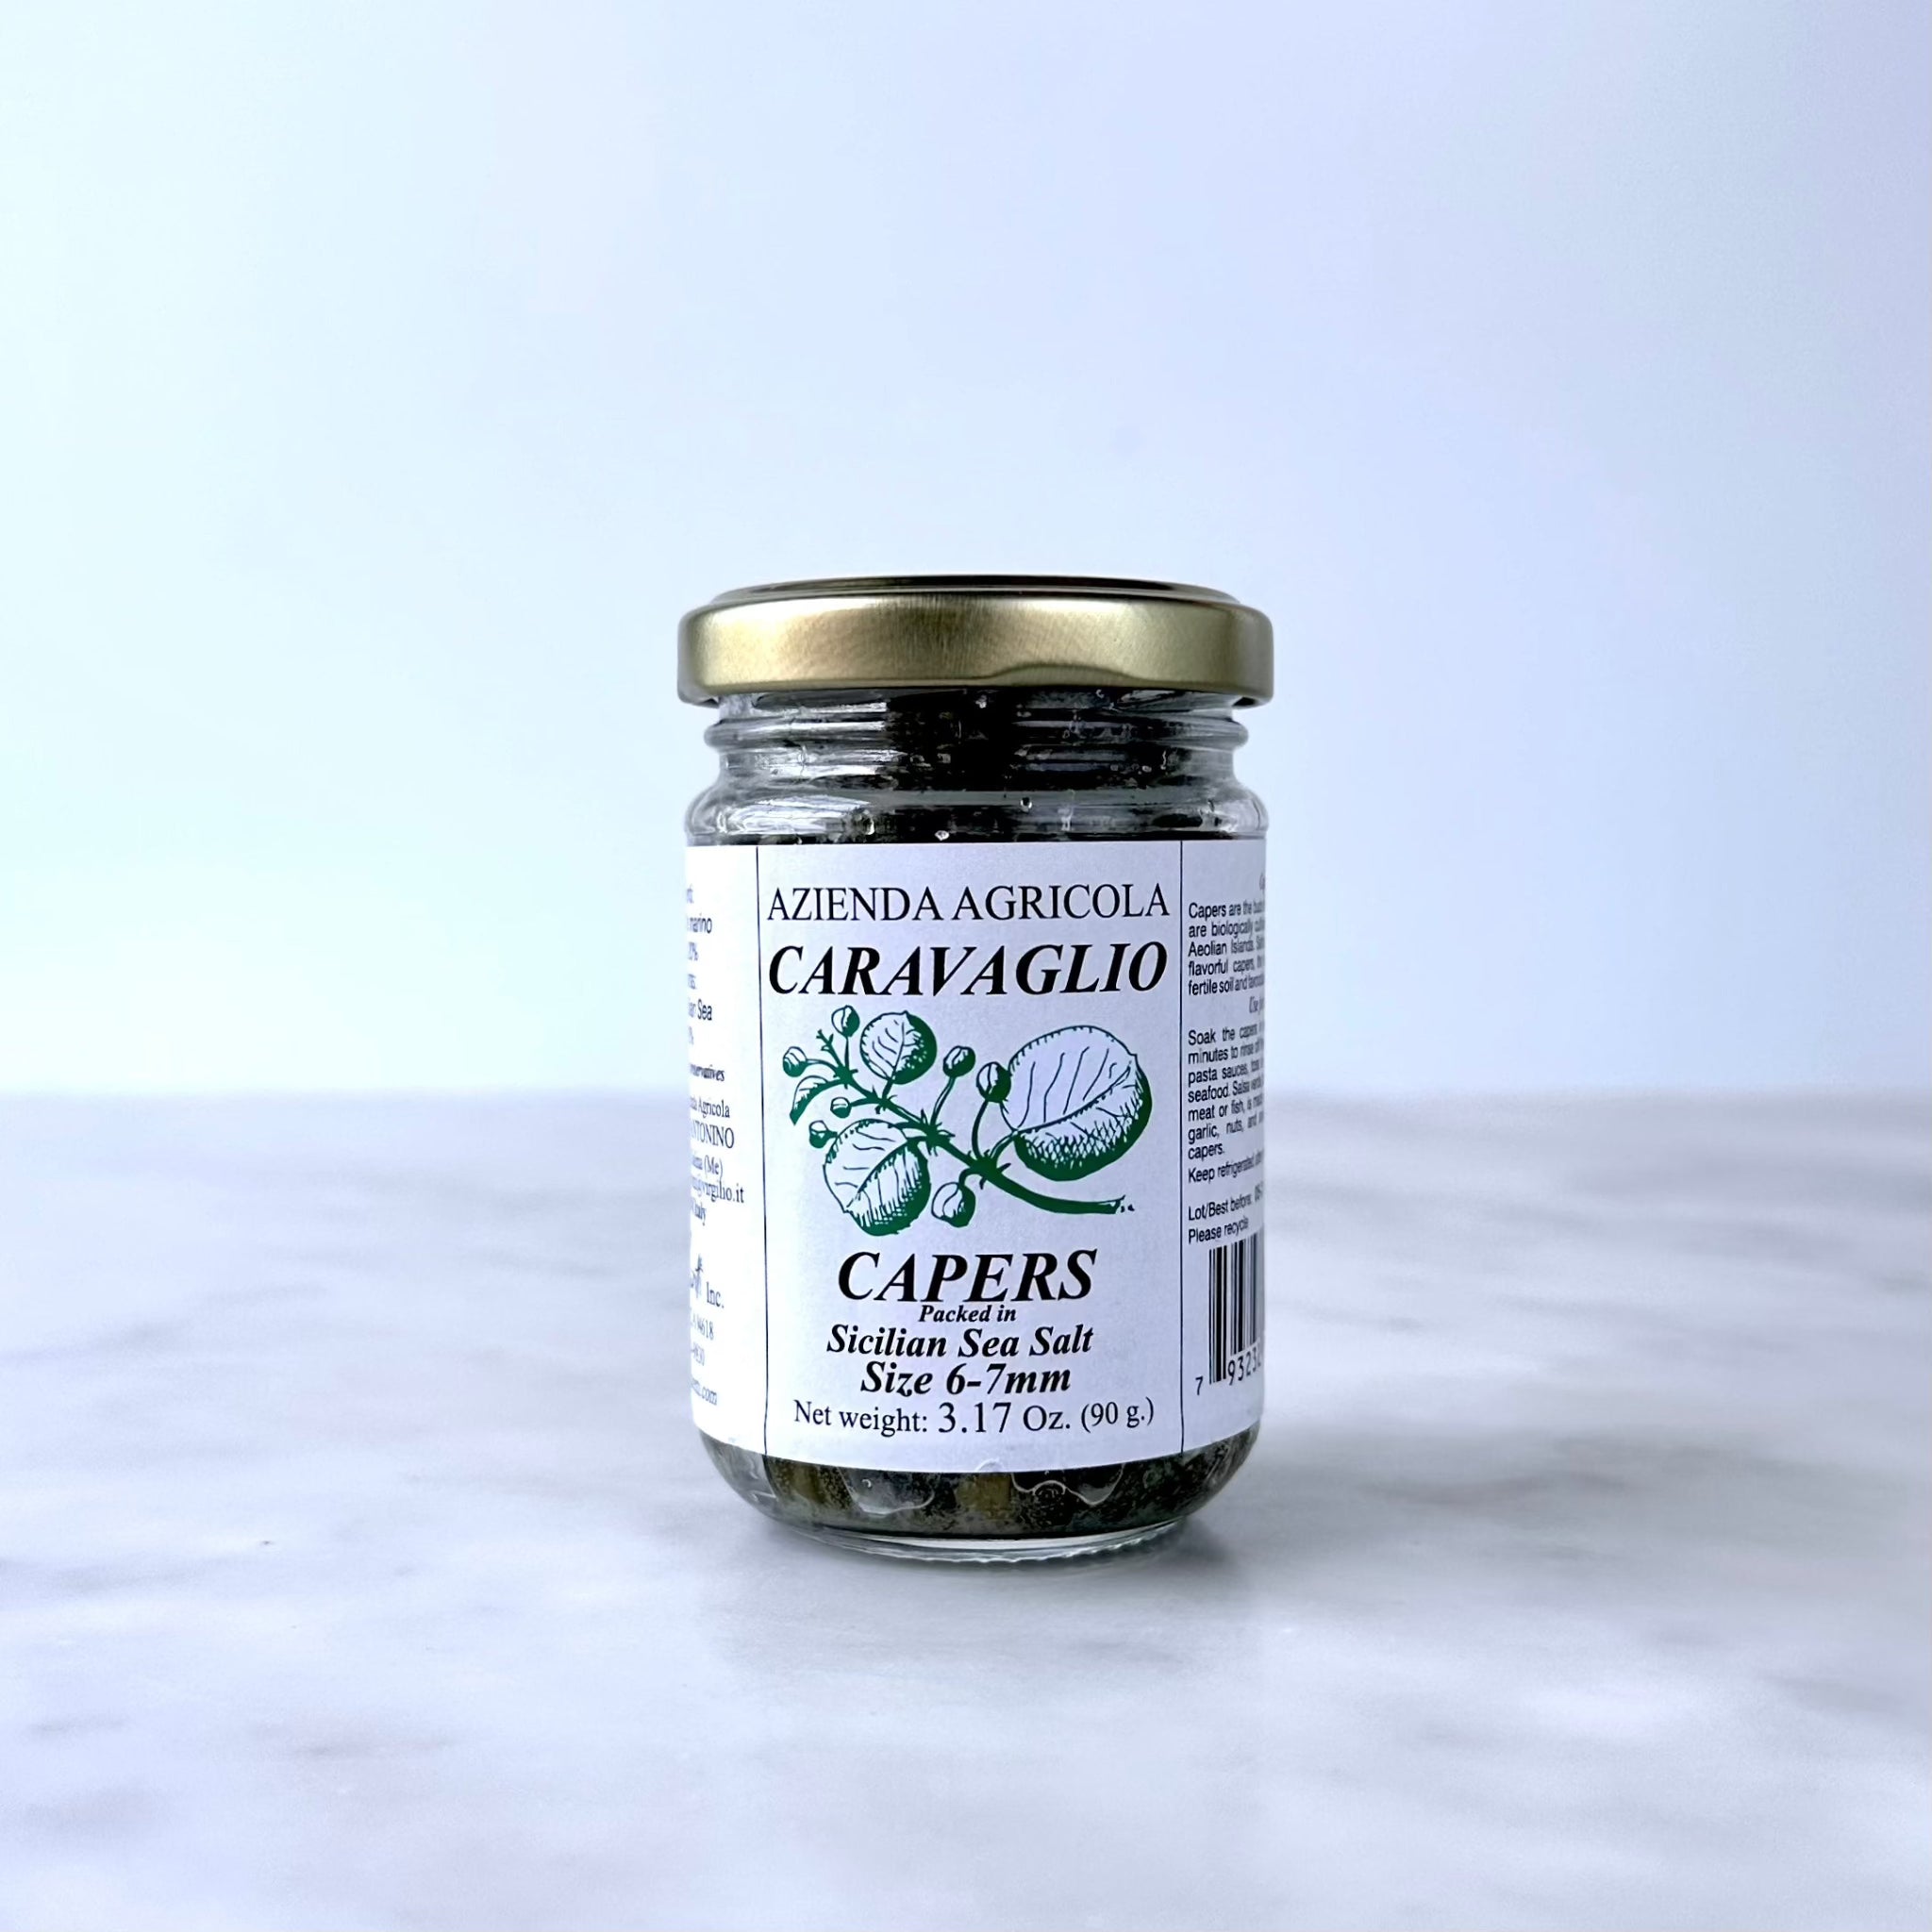 Jar of Sicilian sea salt packed capers from Azienda Agricola